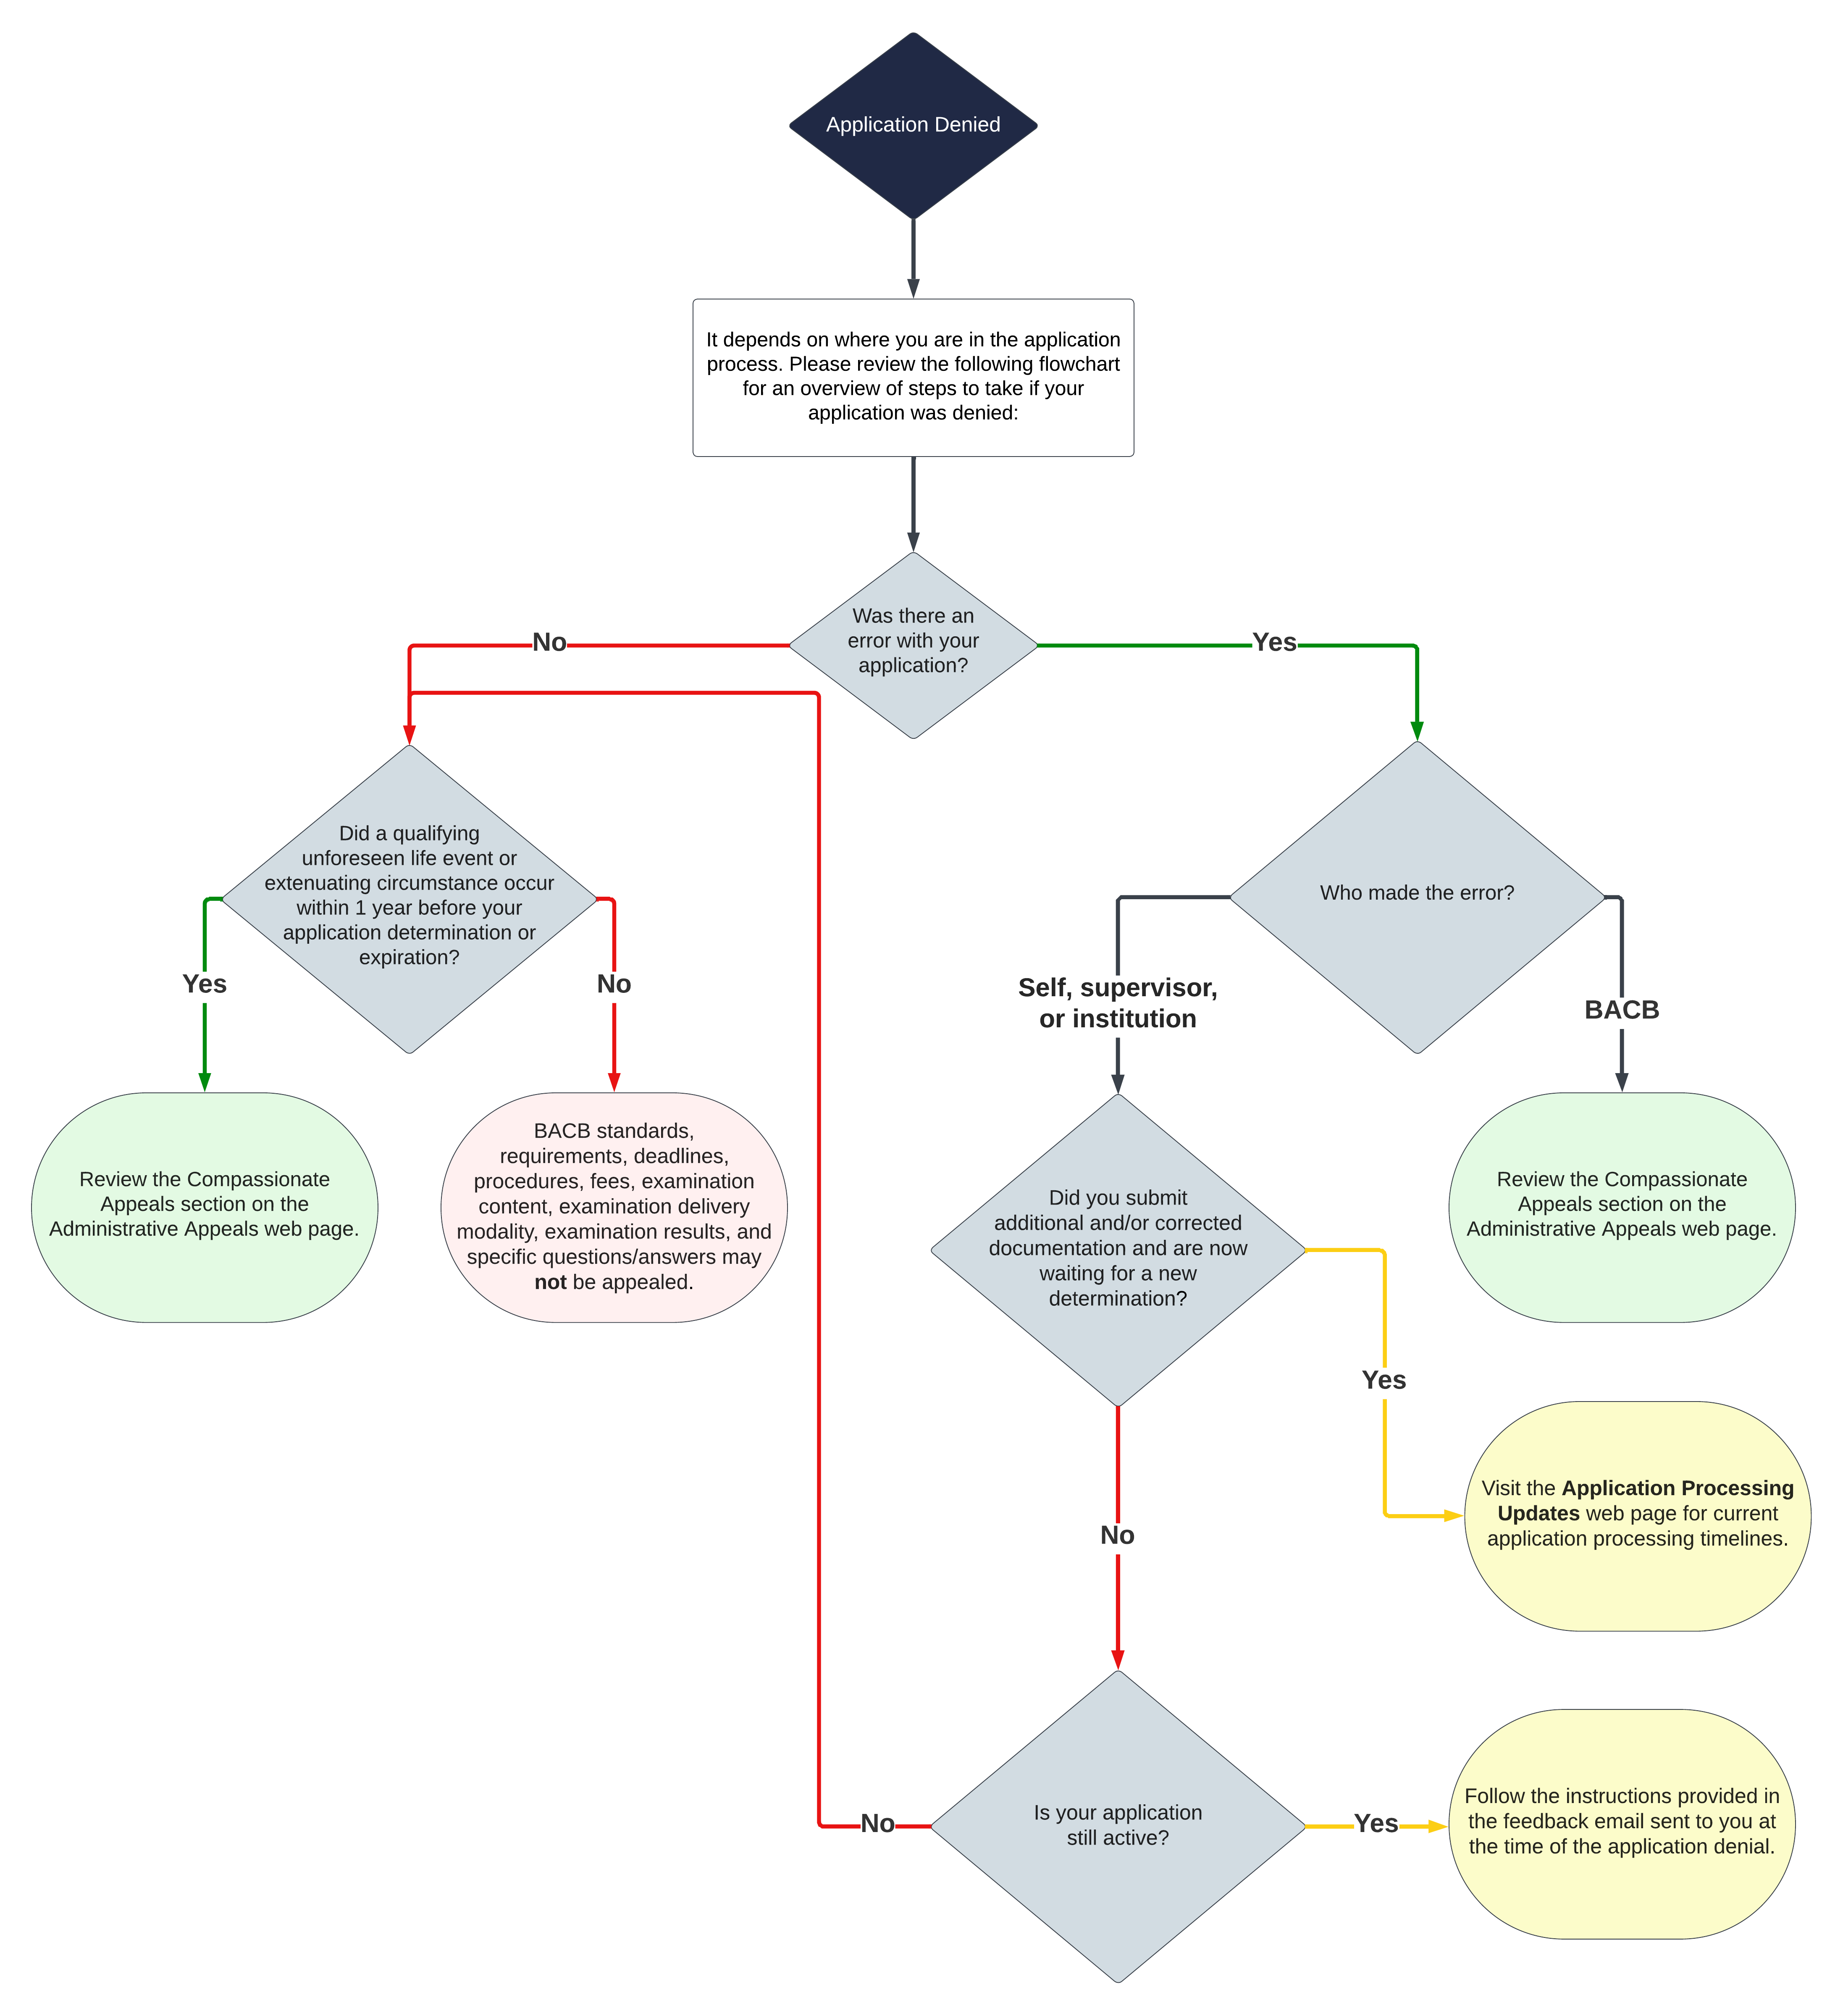 Flowchart overview of the steps to take if a BACB certification application was denied and how it relates to administrative appeals